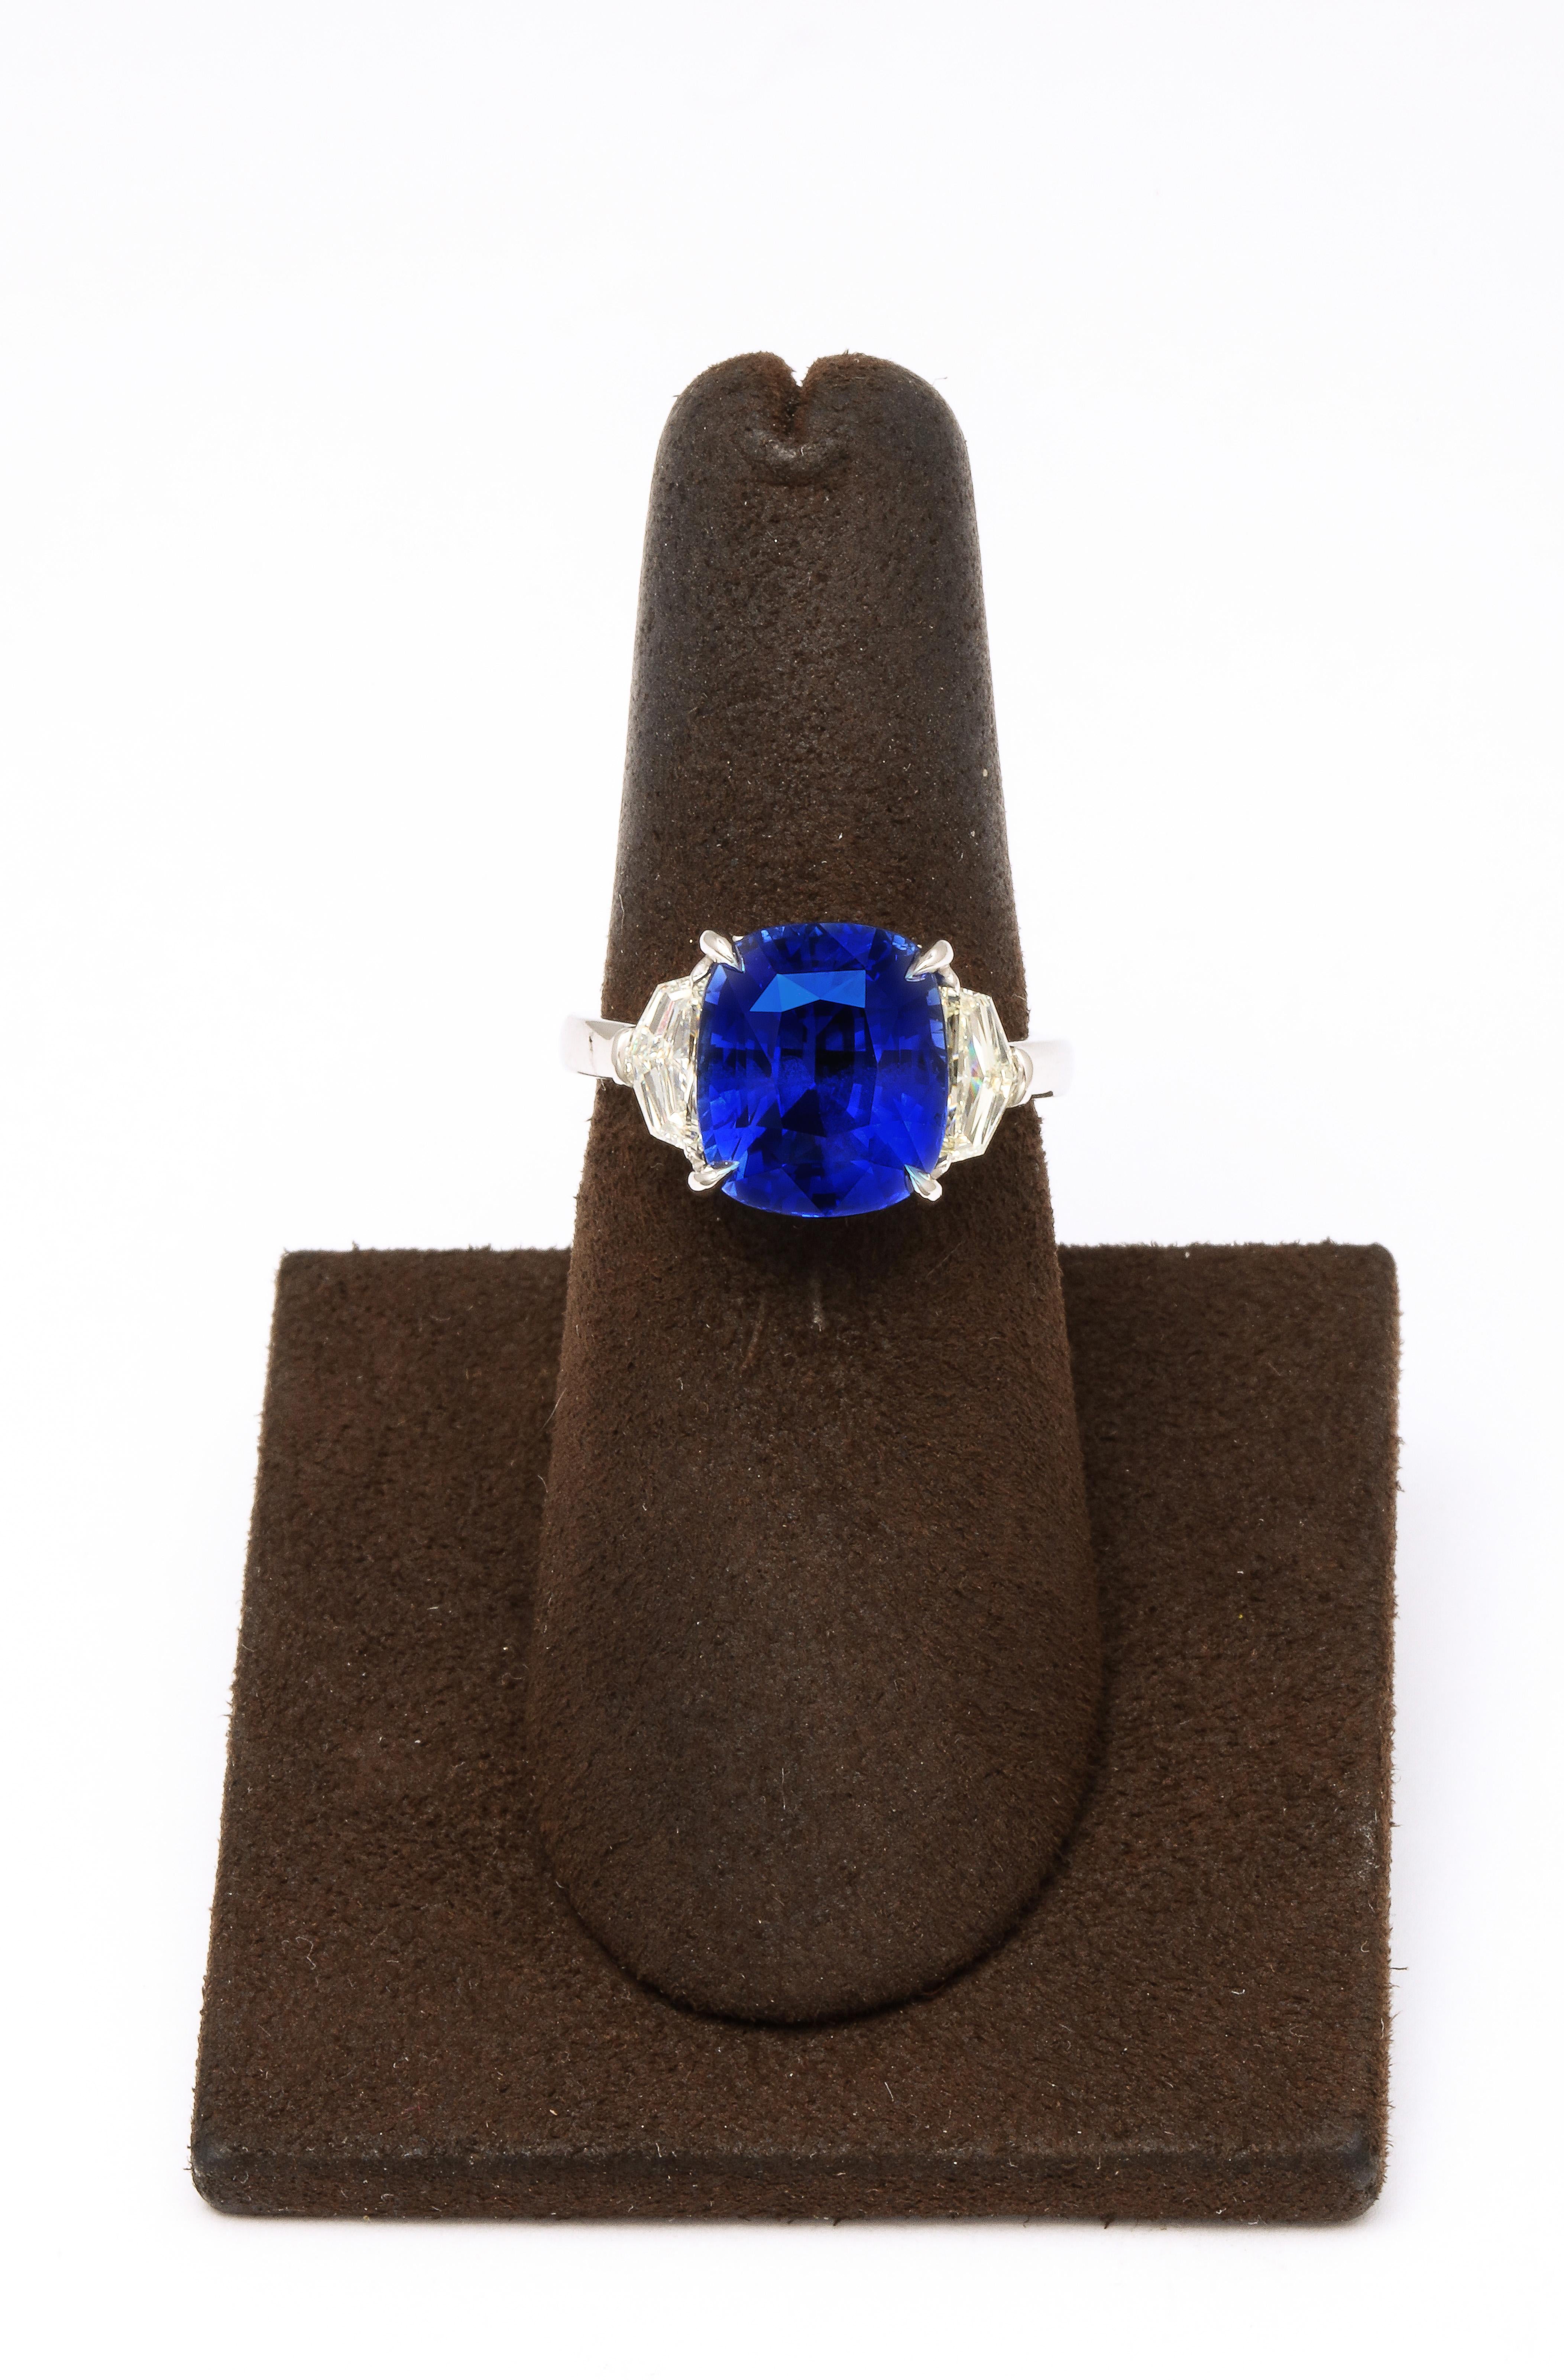 
Certified 7.16 carat Cushion cut Ceylon Blue Sapphire. 

.73 carats of white epaulet side diamonds. 

Custom platinum mounting 

Certified by Christian Dunaigre of Switzerland

Currently a size 6.25, this ring can be sized to any finger size. 